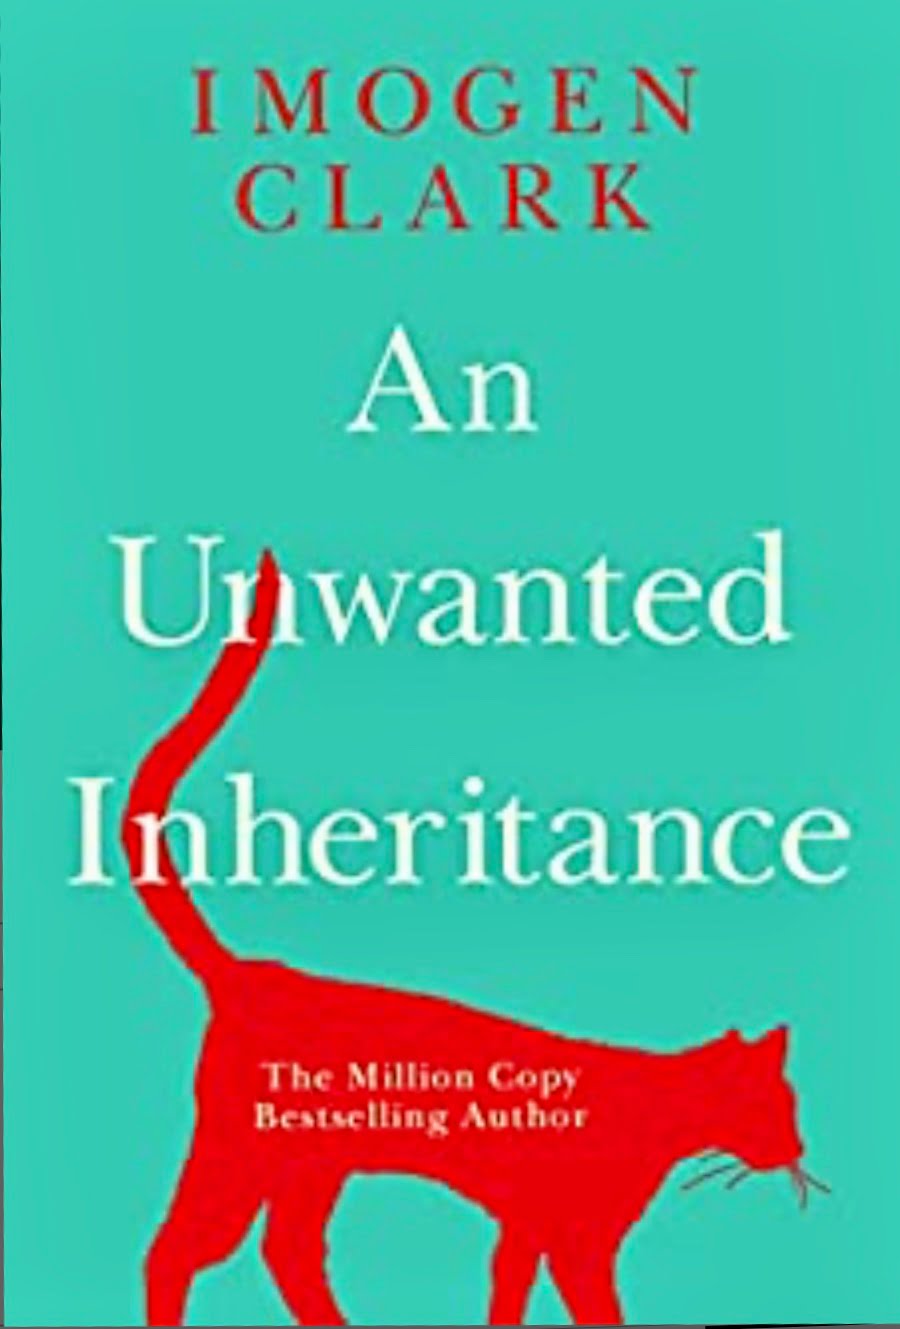 AN UNWANTED INHERITANCE BY IMOGEN CLARK – BOOK REVIEW